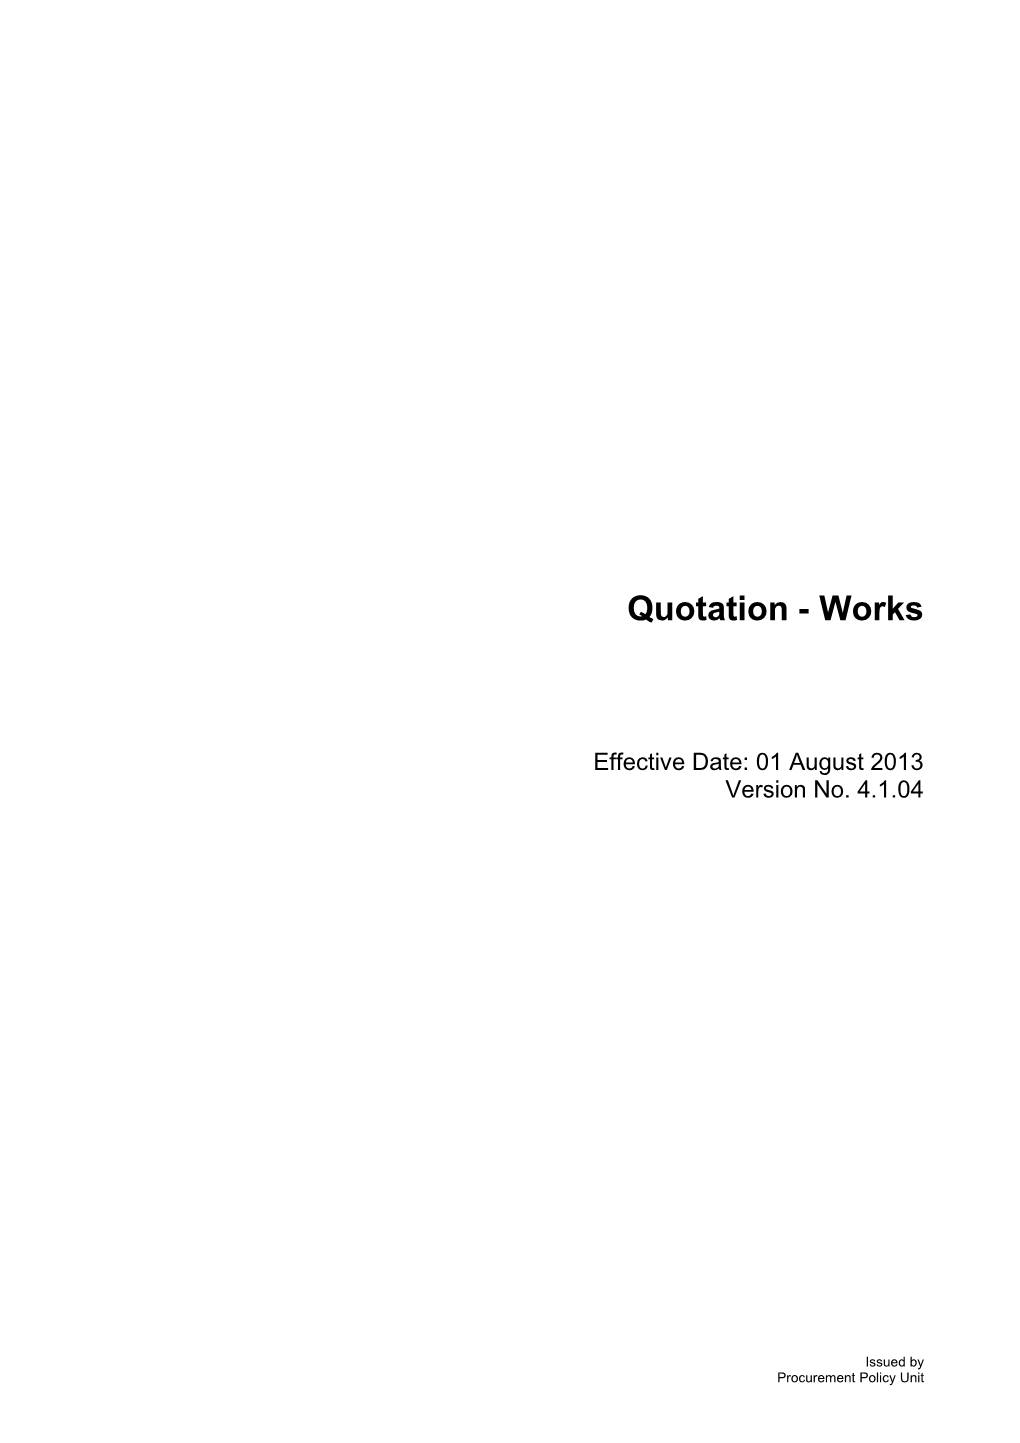 Conditions: Quoting and Contract - Quotation - Works - V 4.1.04 (01 August 2013)